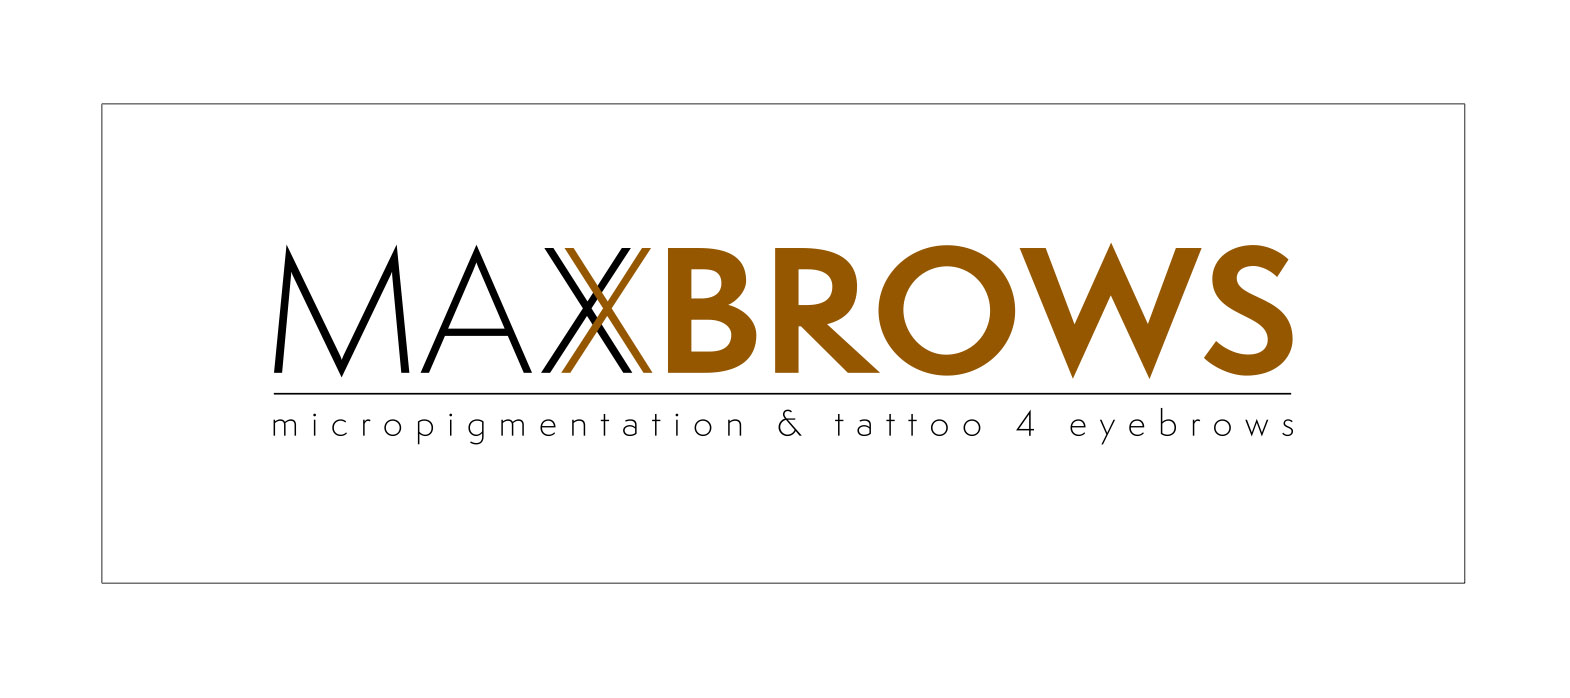 maxbrows